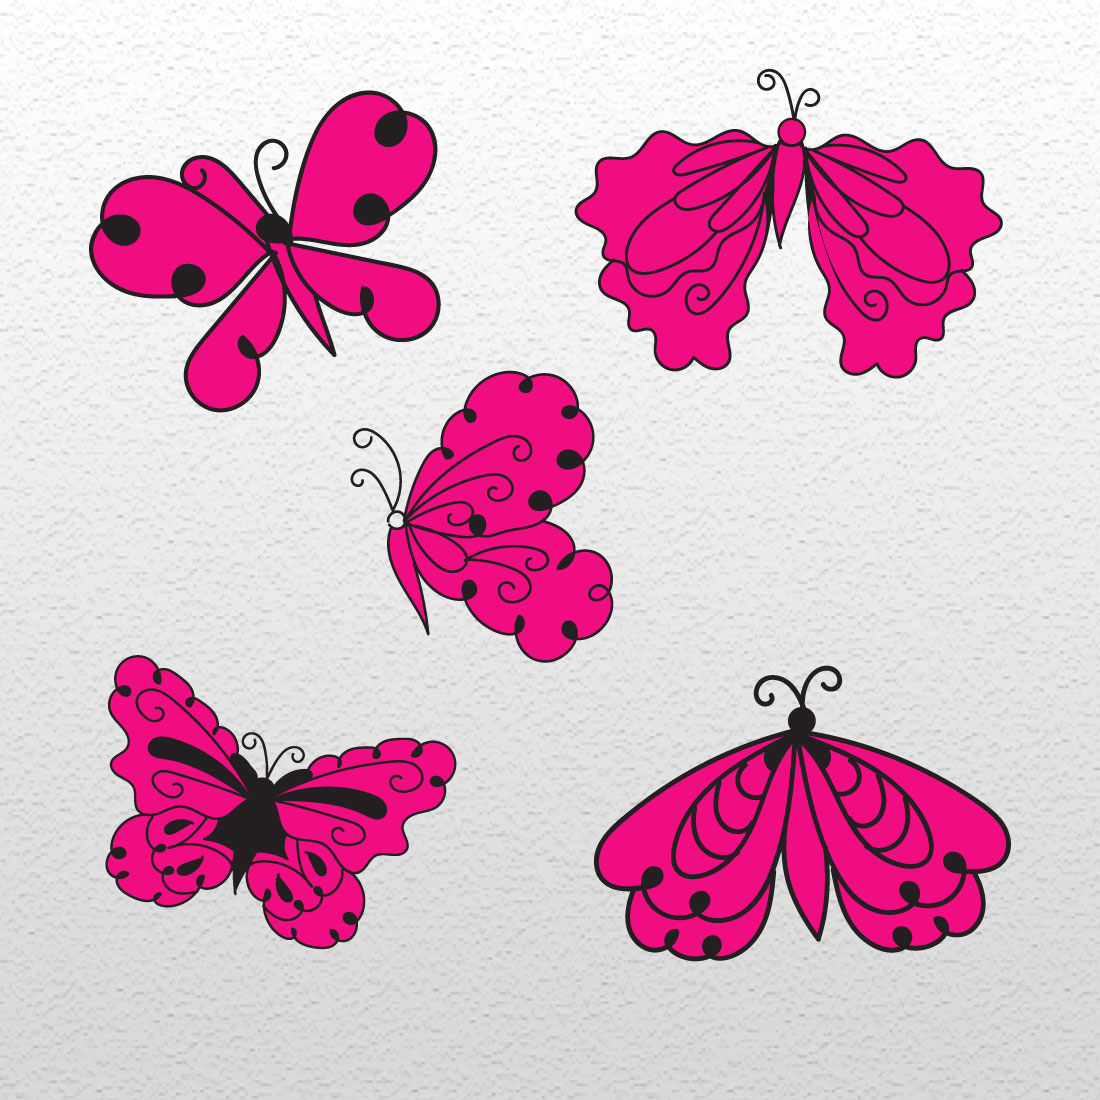 Group of pink and black butterflies on a white background.